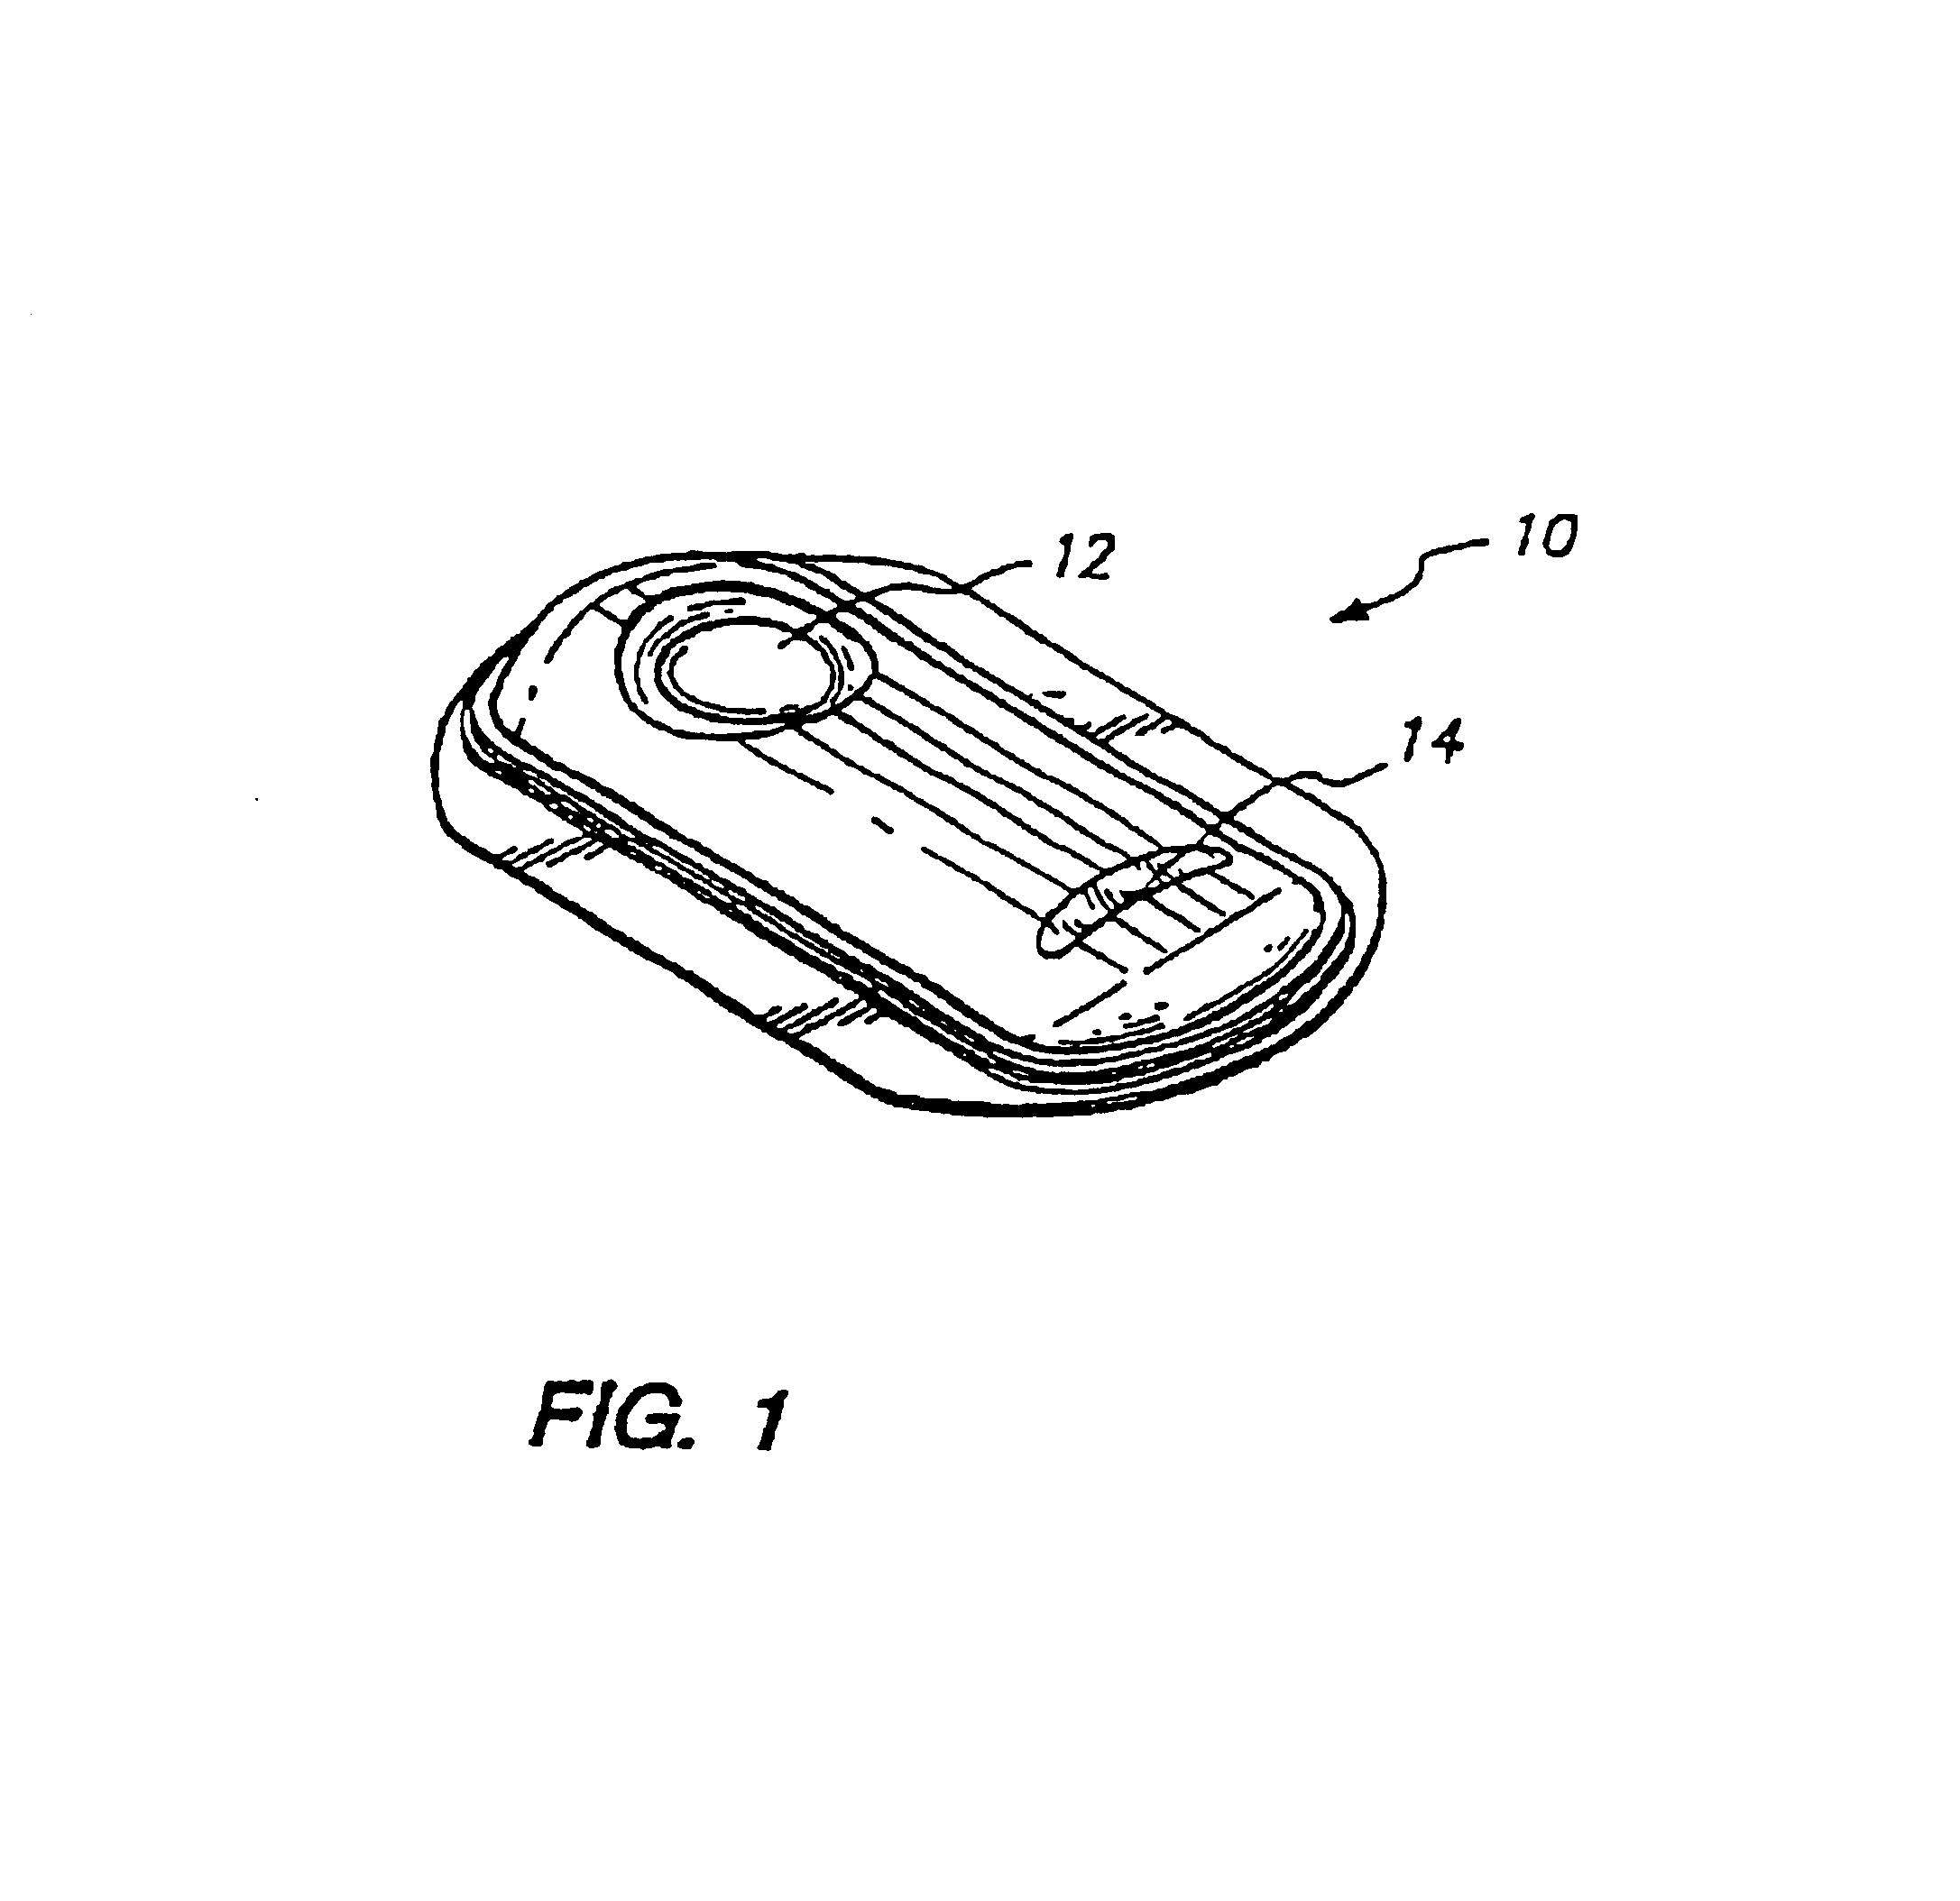 Electrotransport delivery device with voltage boosting circuit